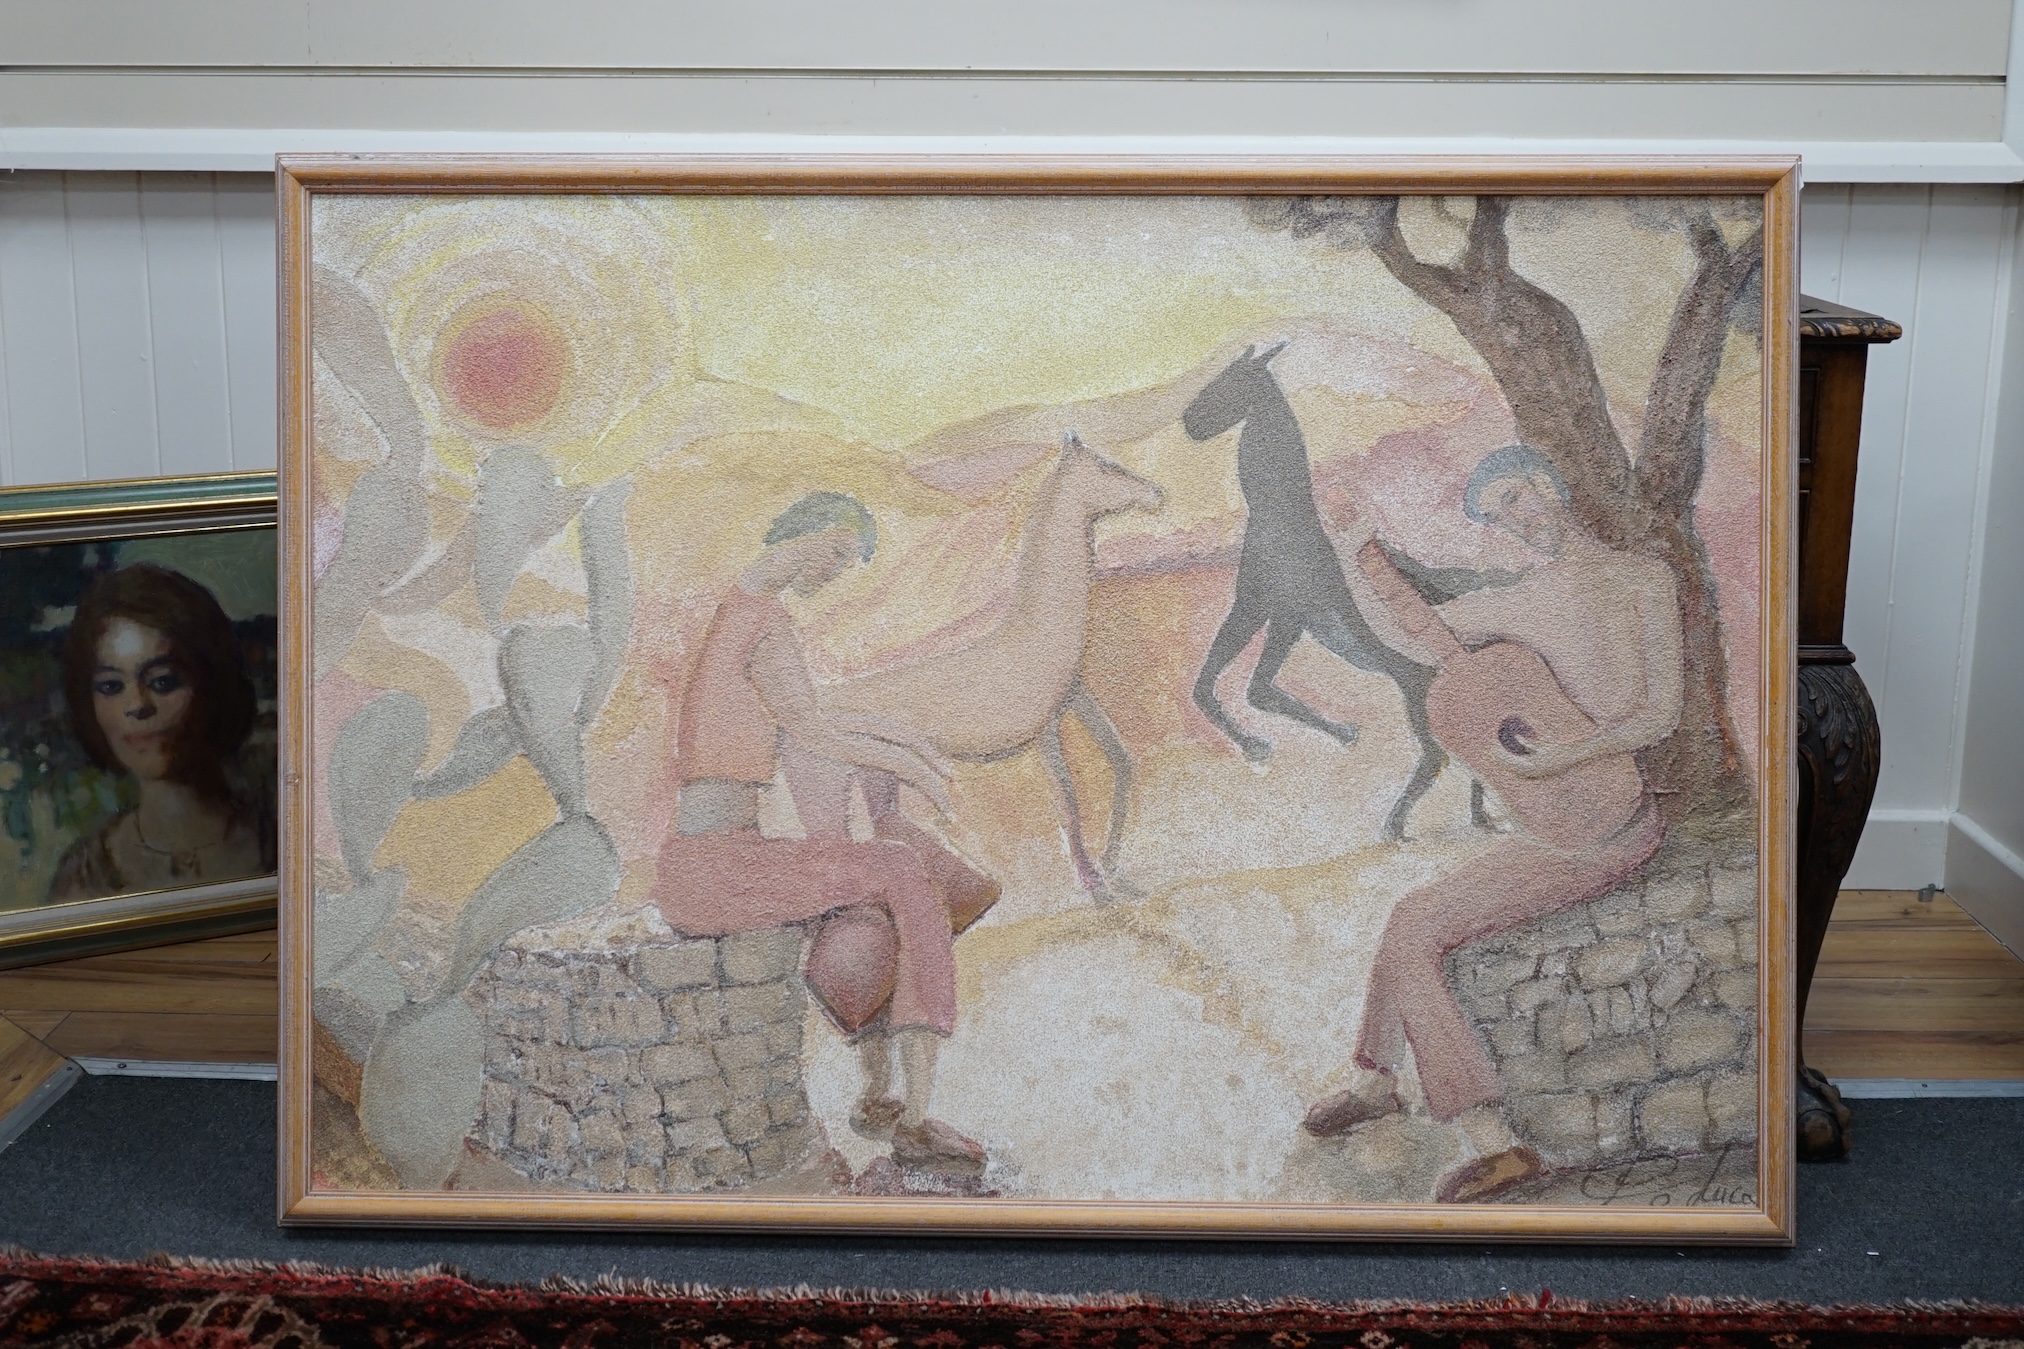 P.O. Luca, sand picture, Surreal landscape, Musicians and horses, signed, 83 x 120cm. Condition - good